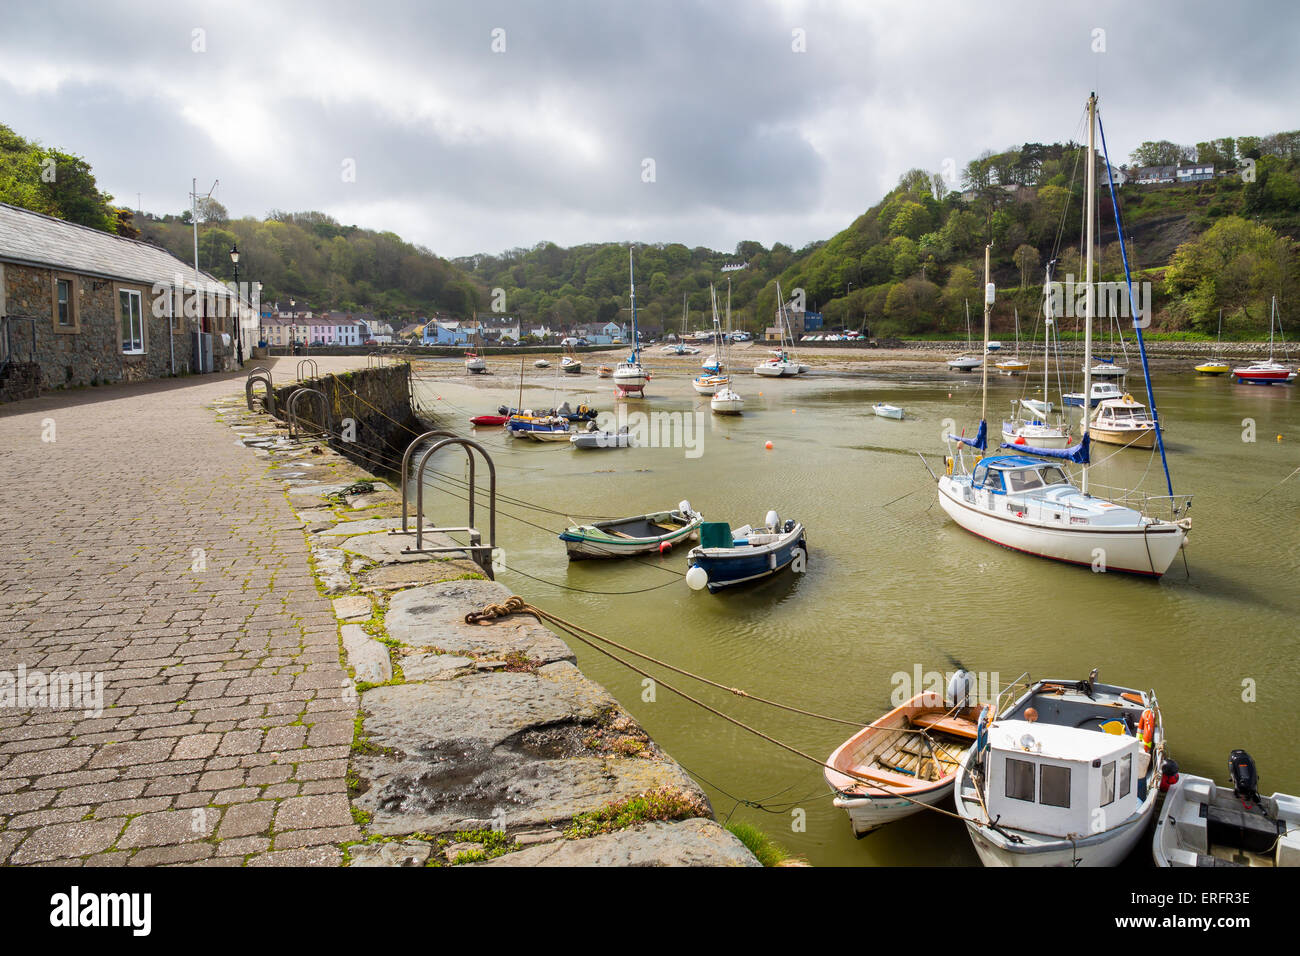 Fishguard a coastal town in Pembrokeshire, south west Wales UK Europe Stock Photo